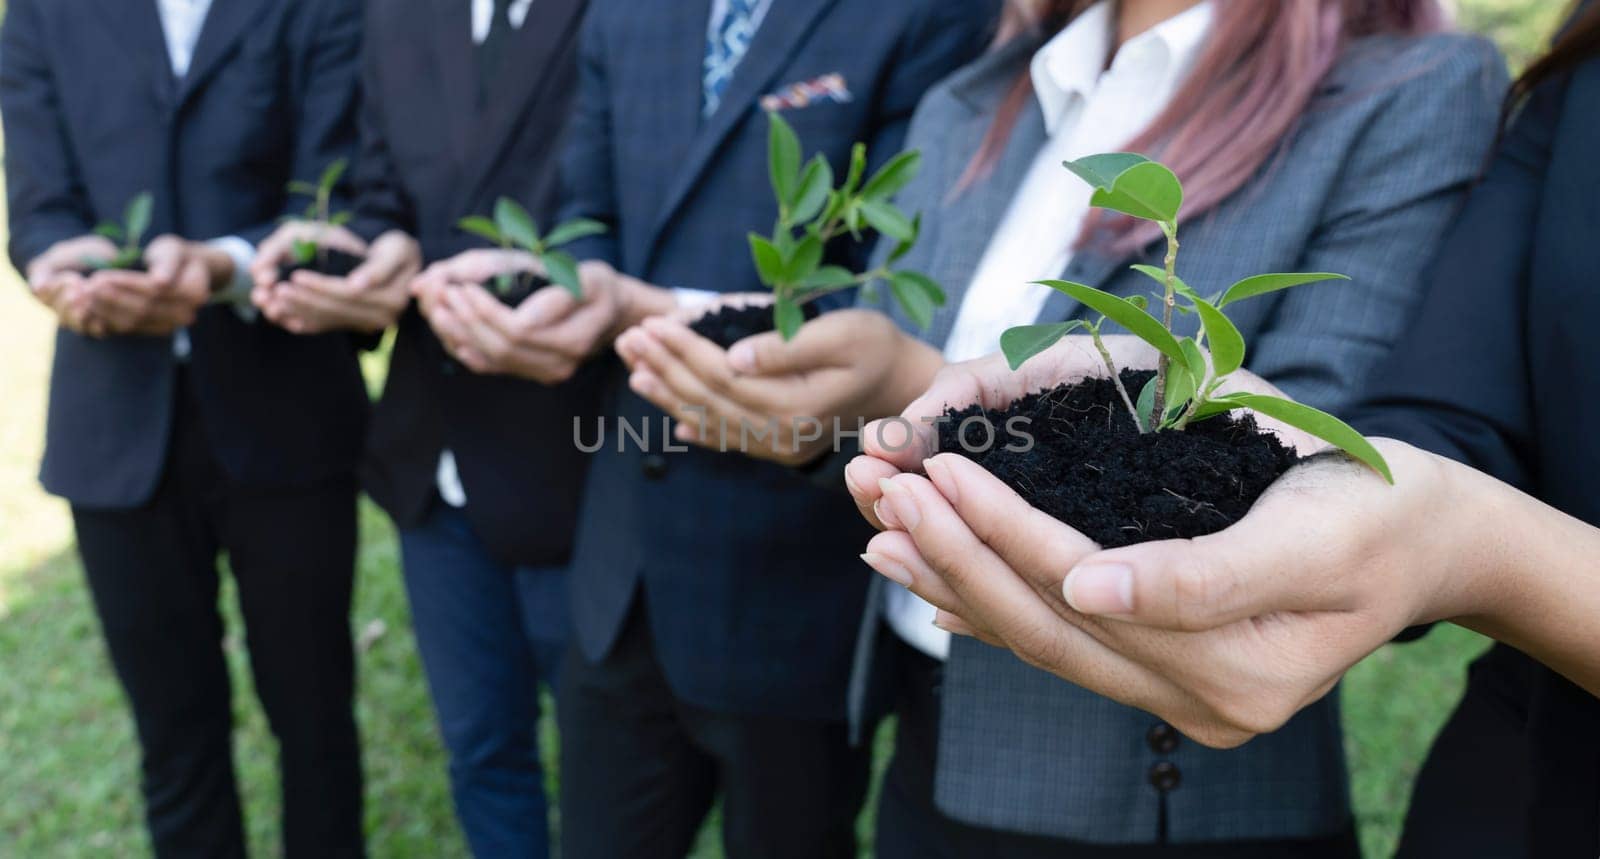 Business people holding plant or sprout together in unity as CSR commitment.Gyre by biancoblue